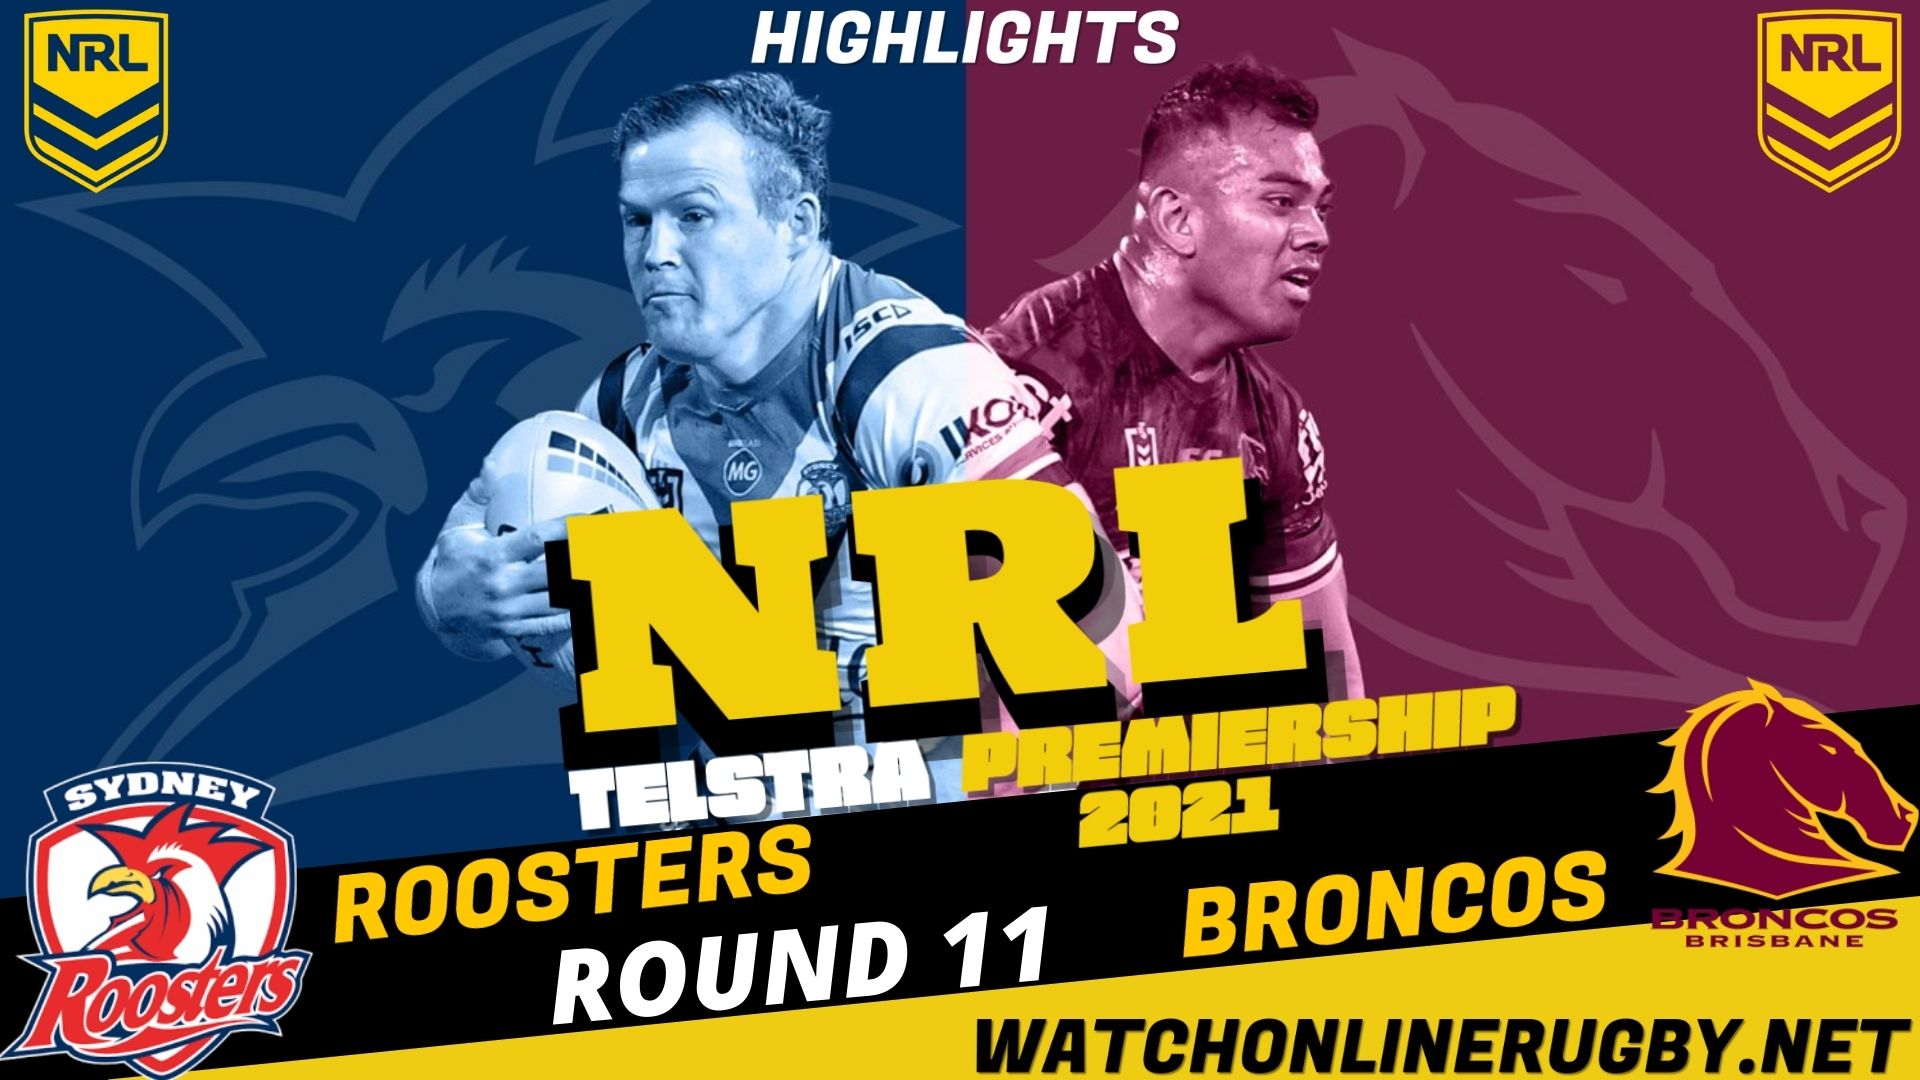 Roosters Vs Broncos Highlights RD 11 NRL Rugby